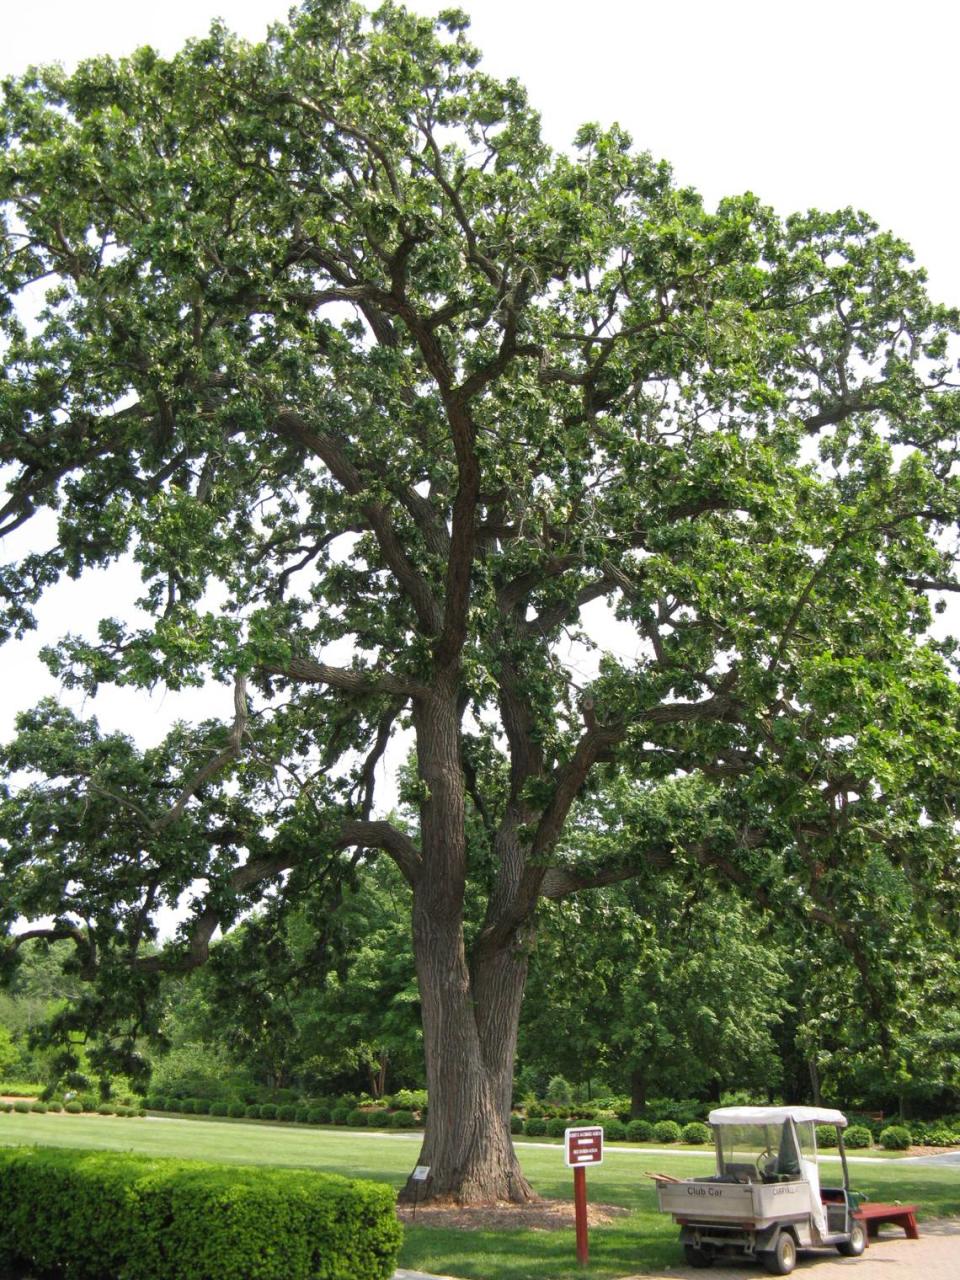 Oaks are considered a keystone species and provide habitat support to hundreds of creatures.